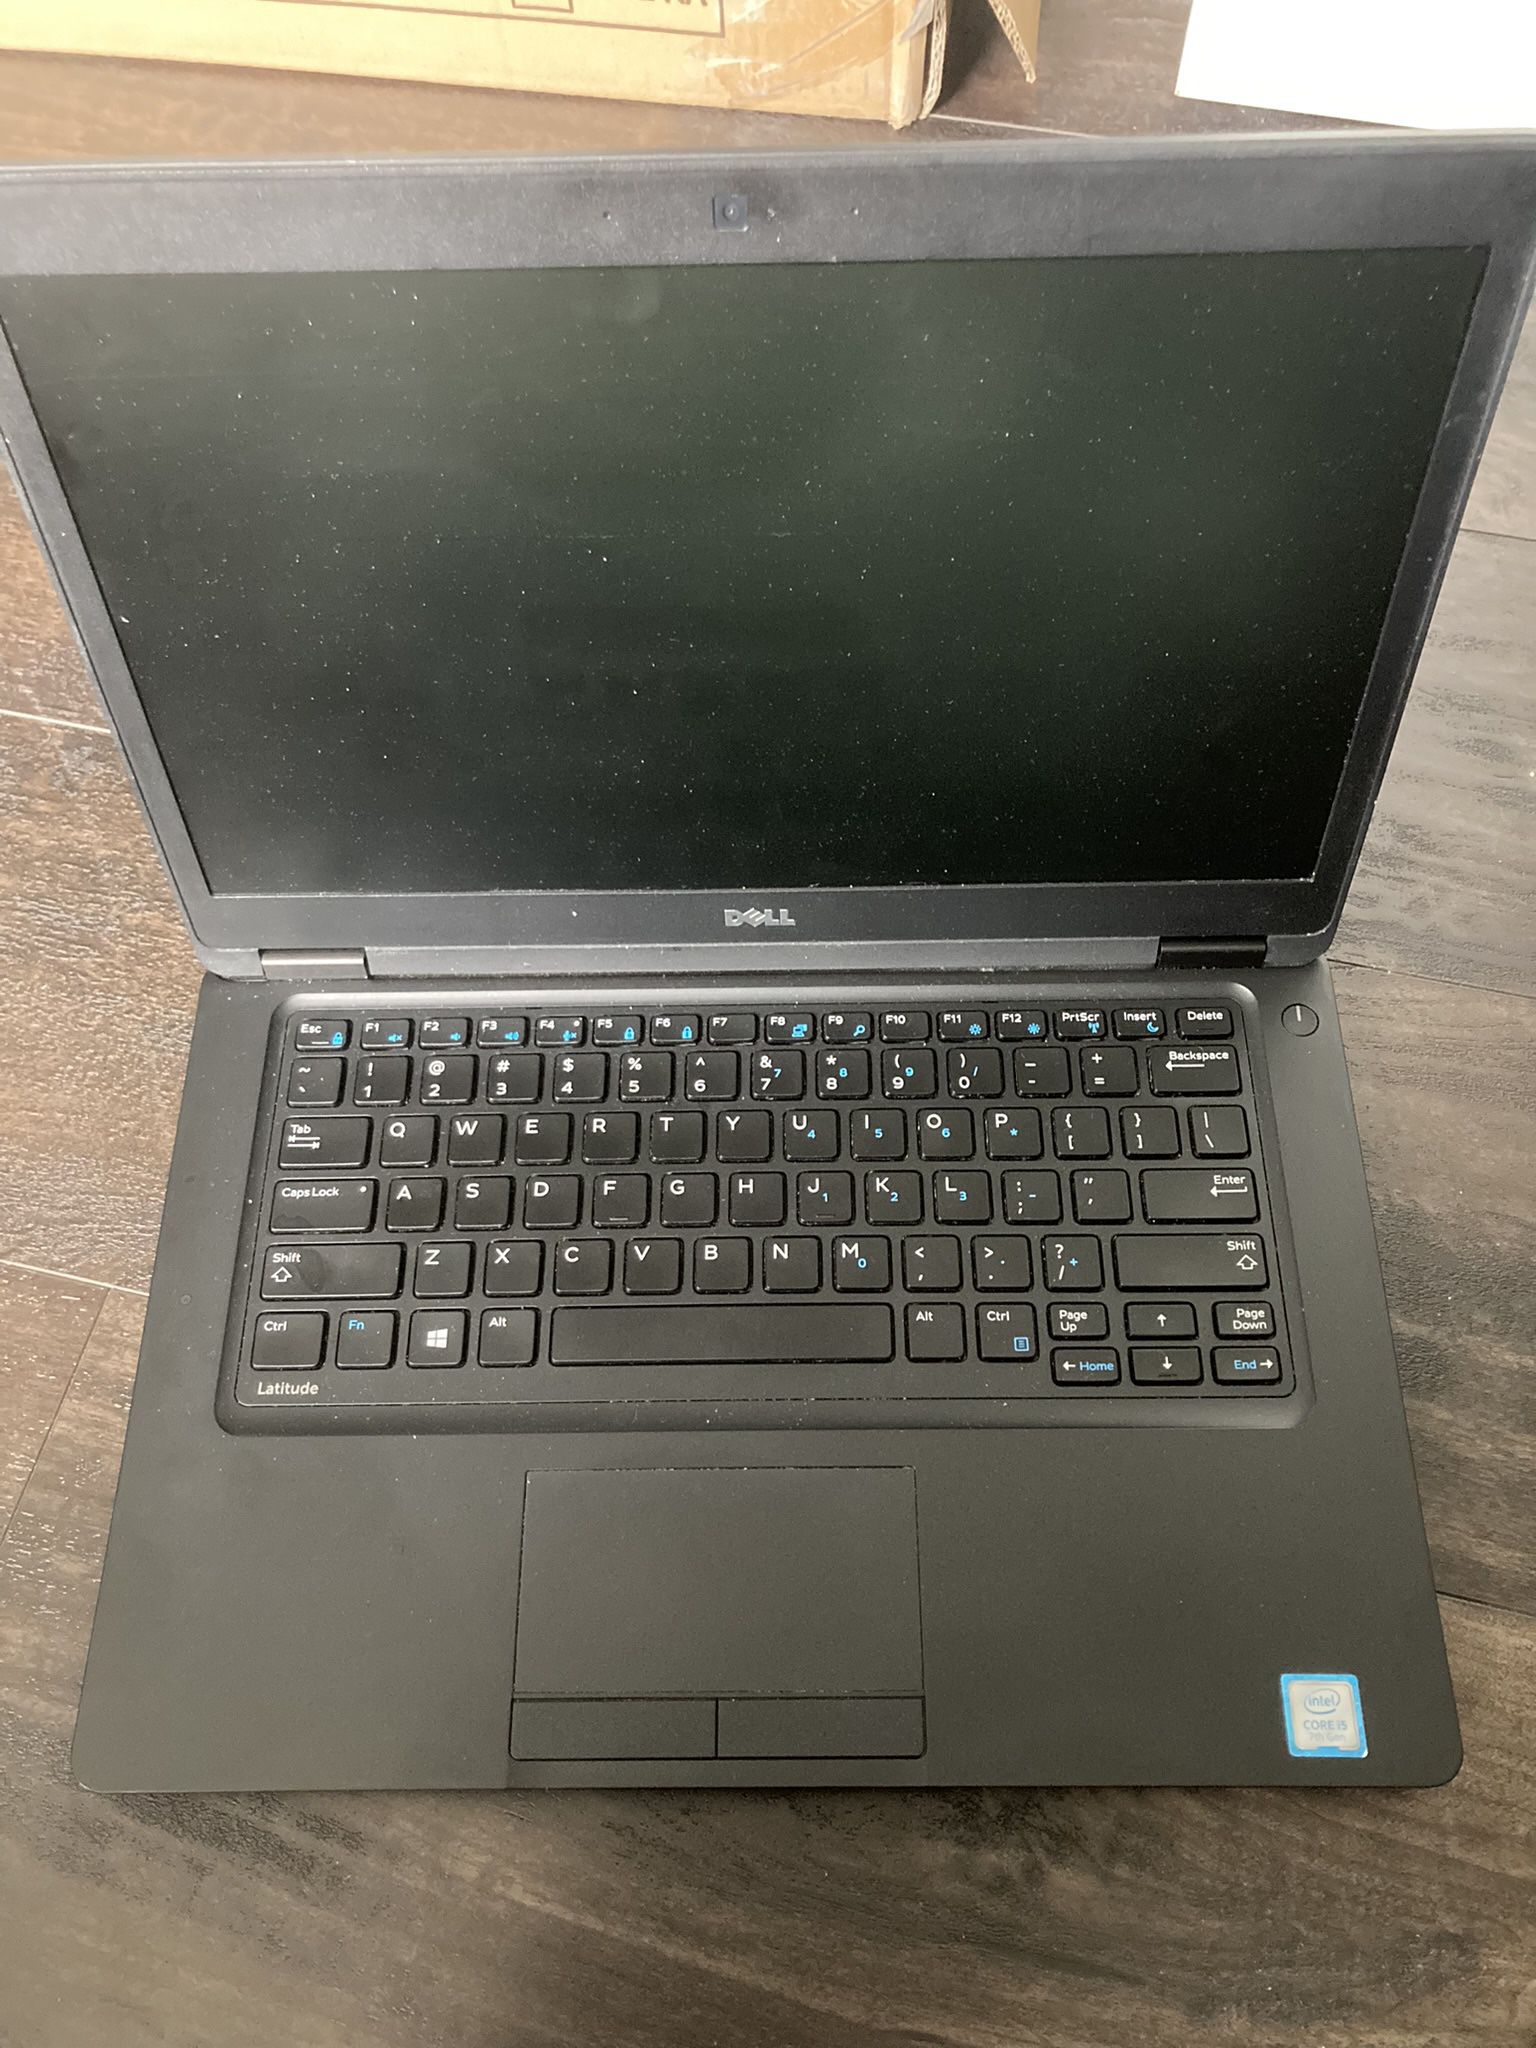 Used Refurbished Dell Laptop